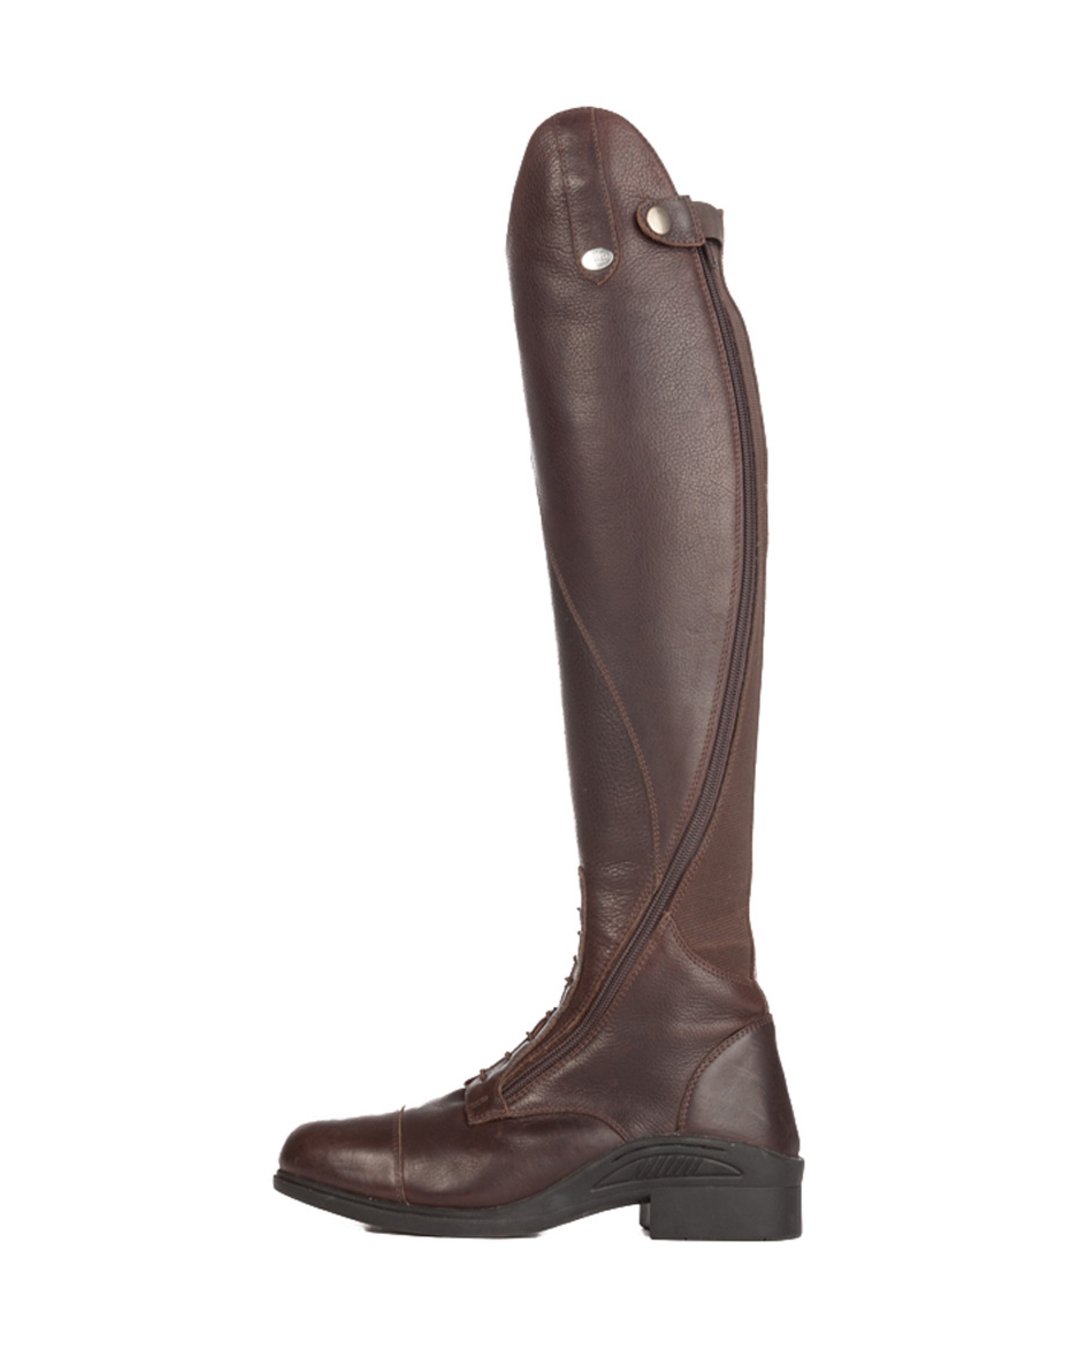 Reitstiefel Proximo Braun 41 LL